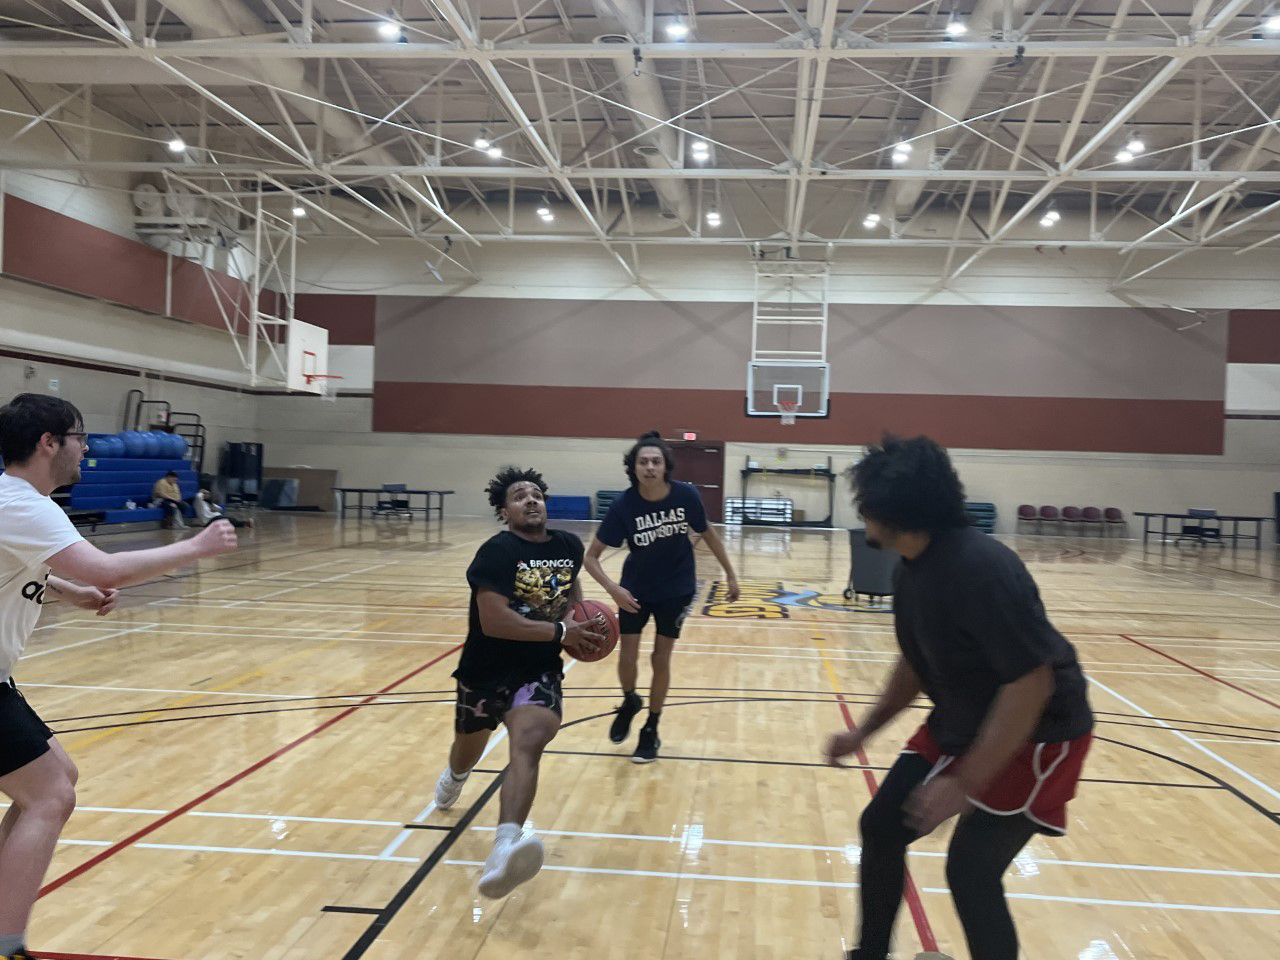 3v3 Basketball, Jayhawks rise as undefeated champions